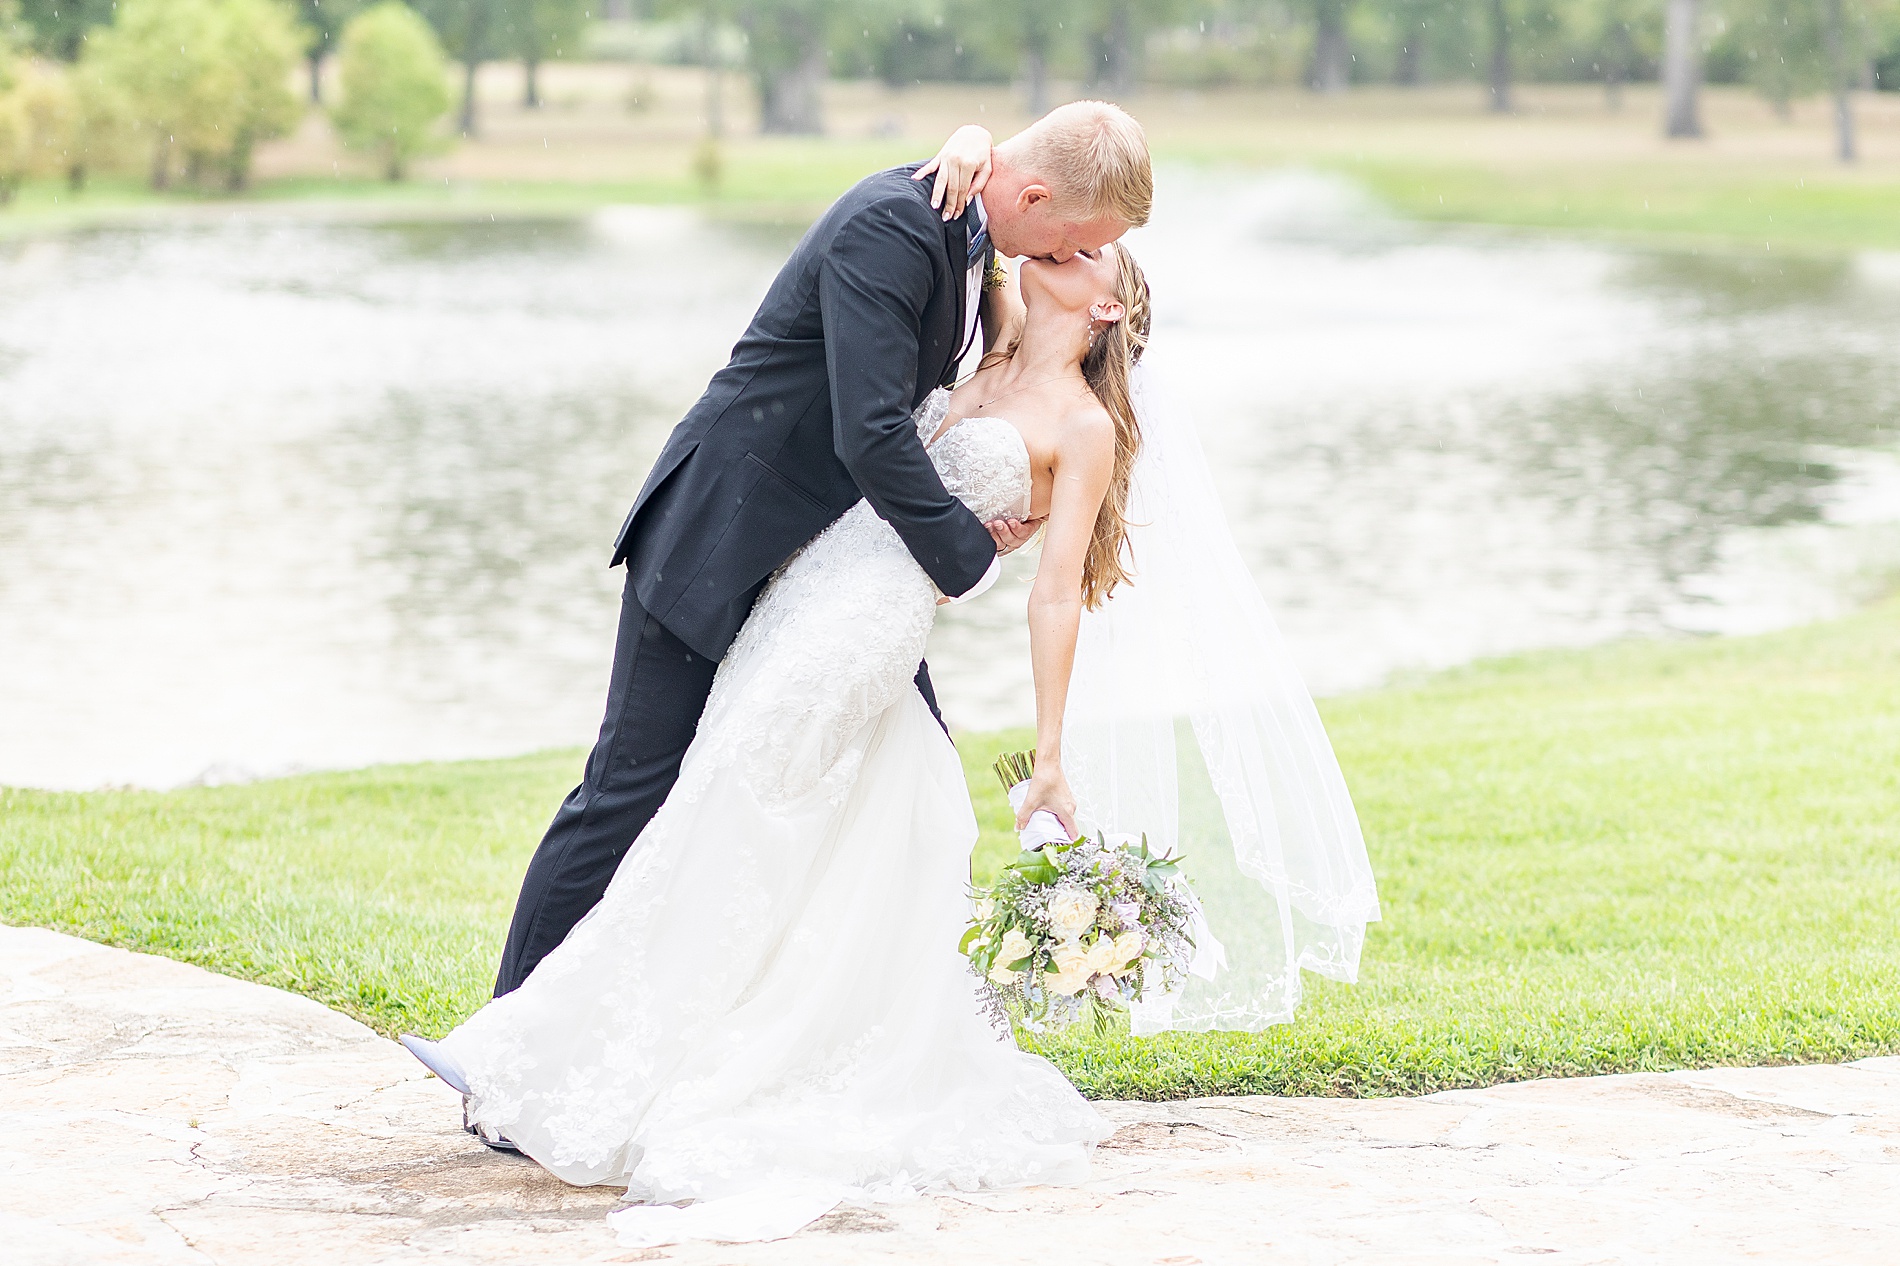 Romantic and timeless wedding portraits | How to choose your wedding photographer